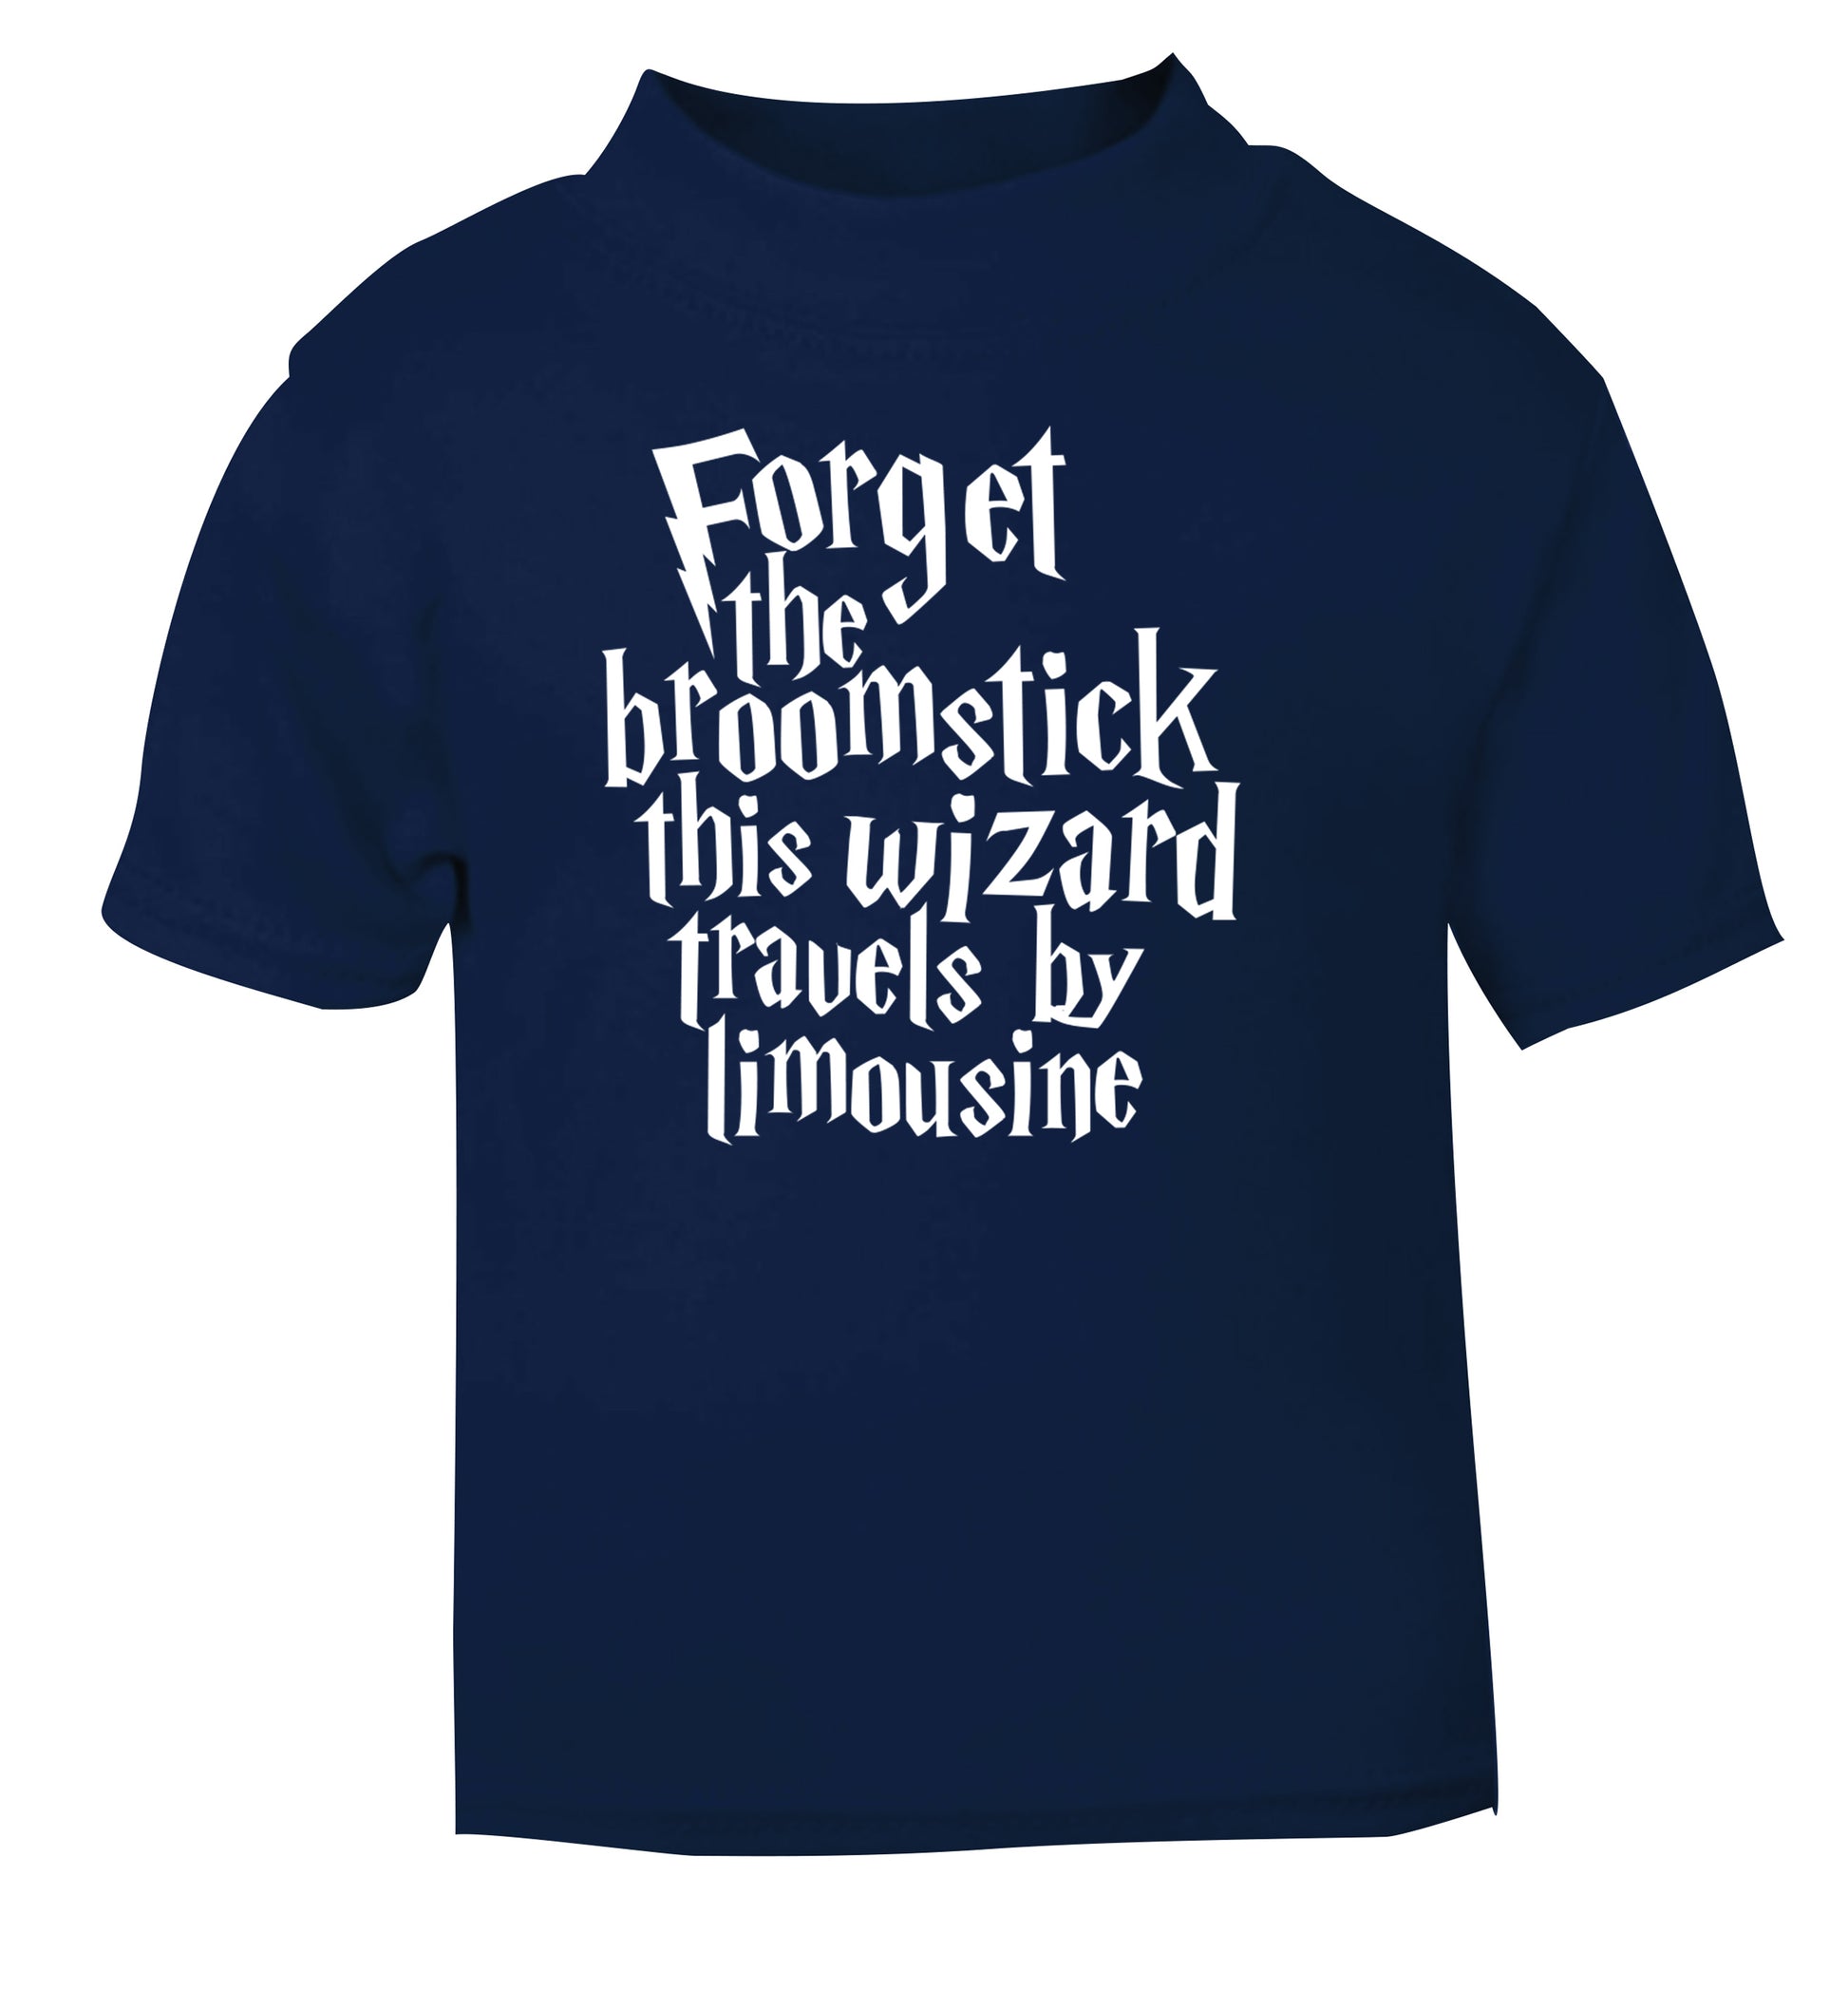 Forget the broomstick this wizard travels by limousine navy Baby Toddler Tshirt 2 Years